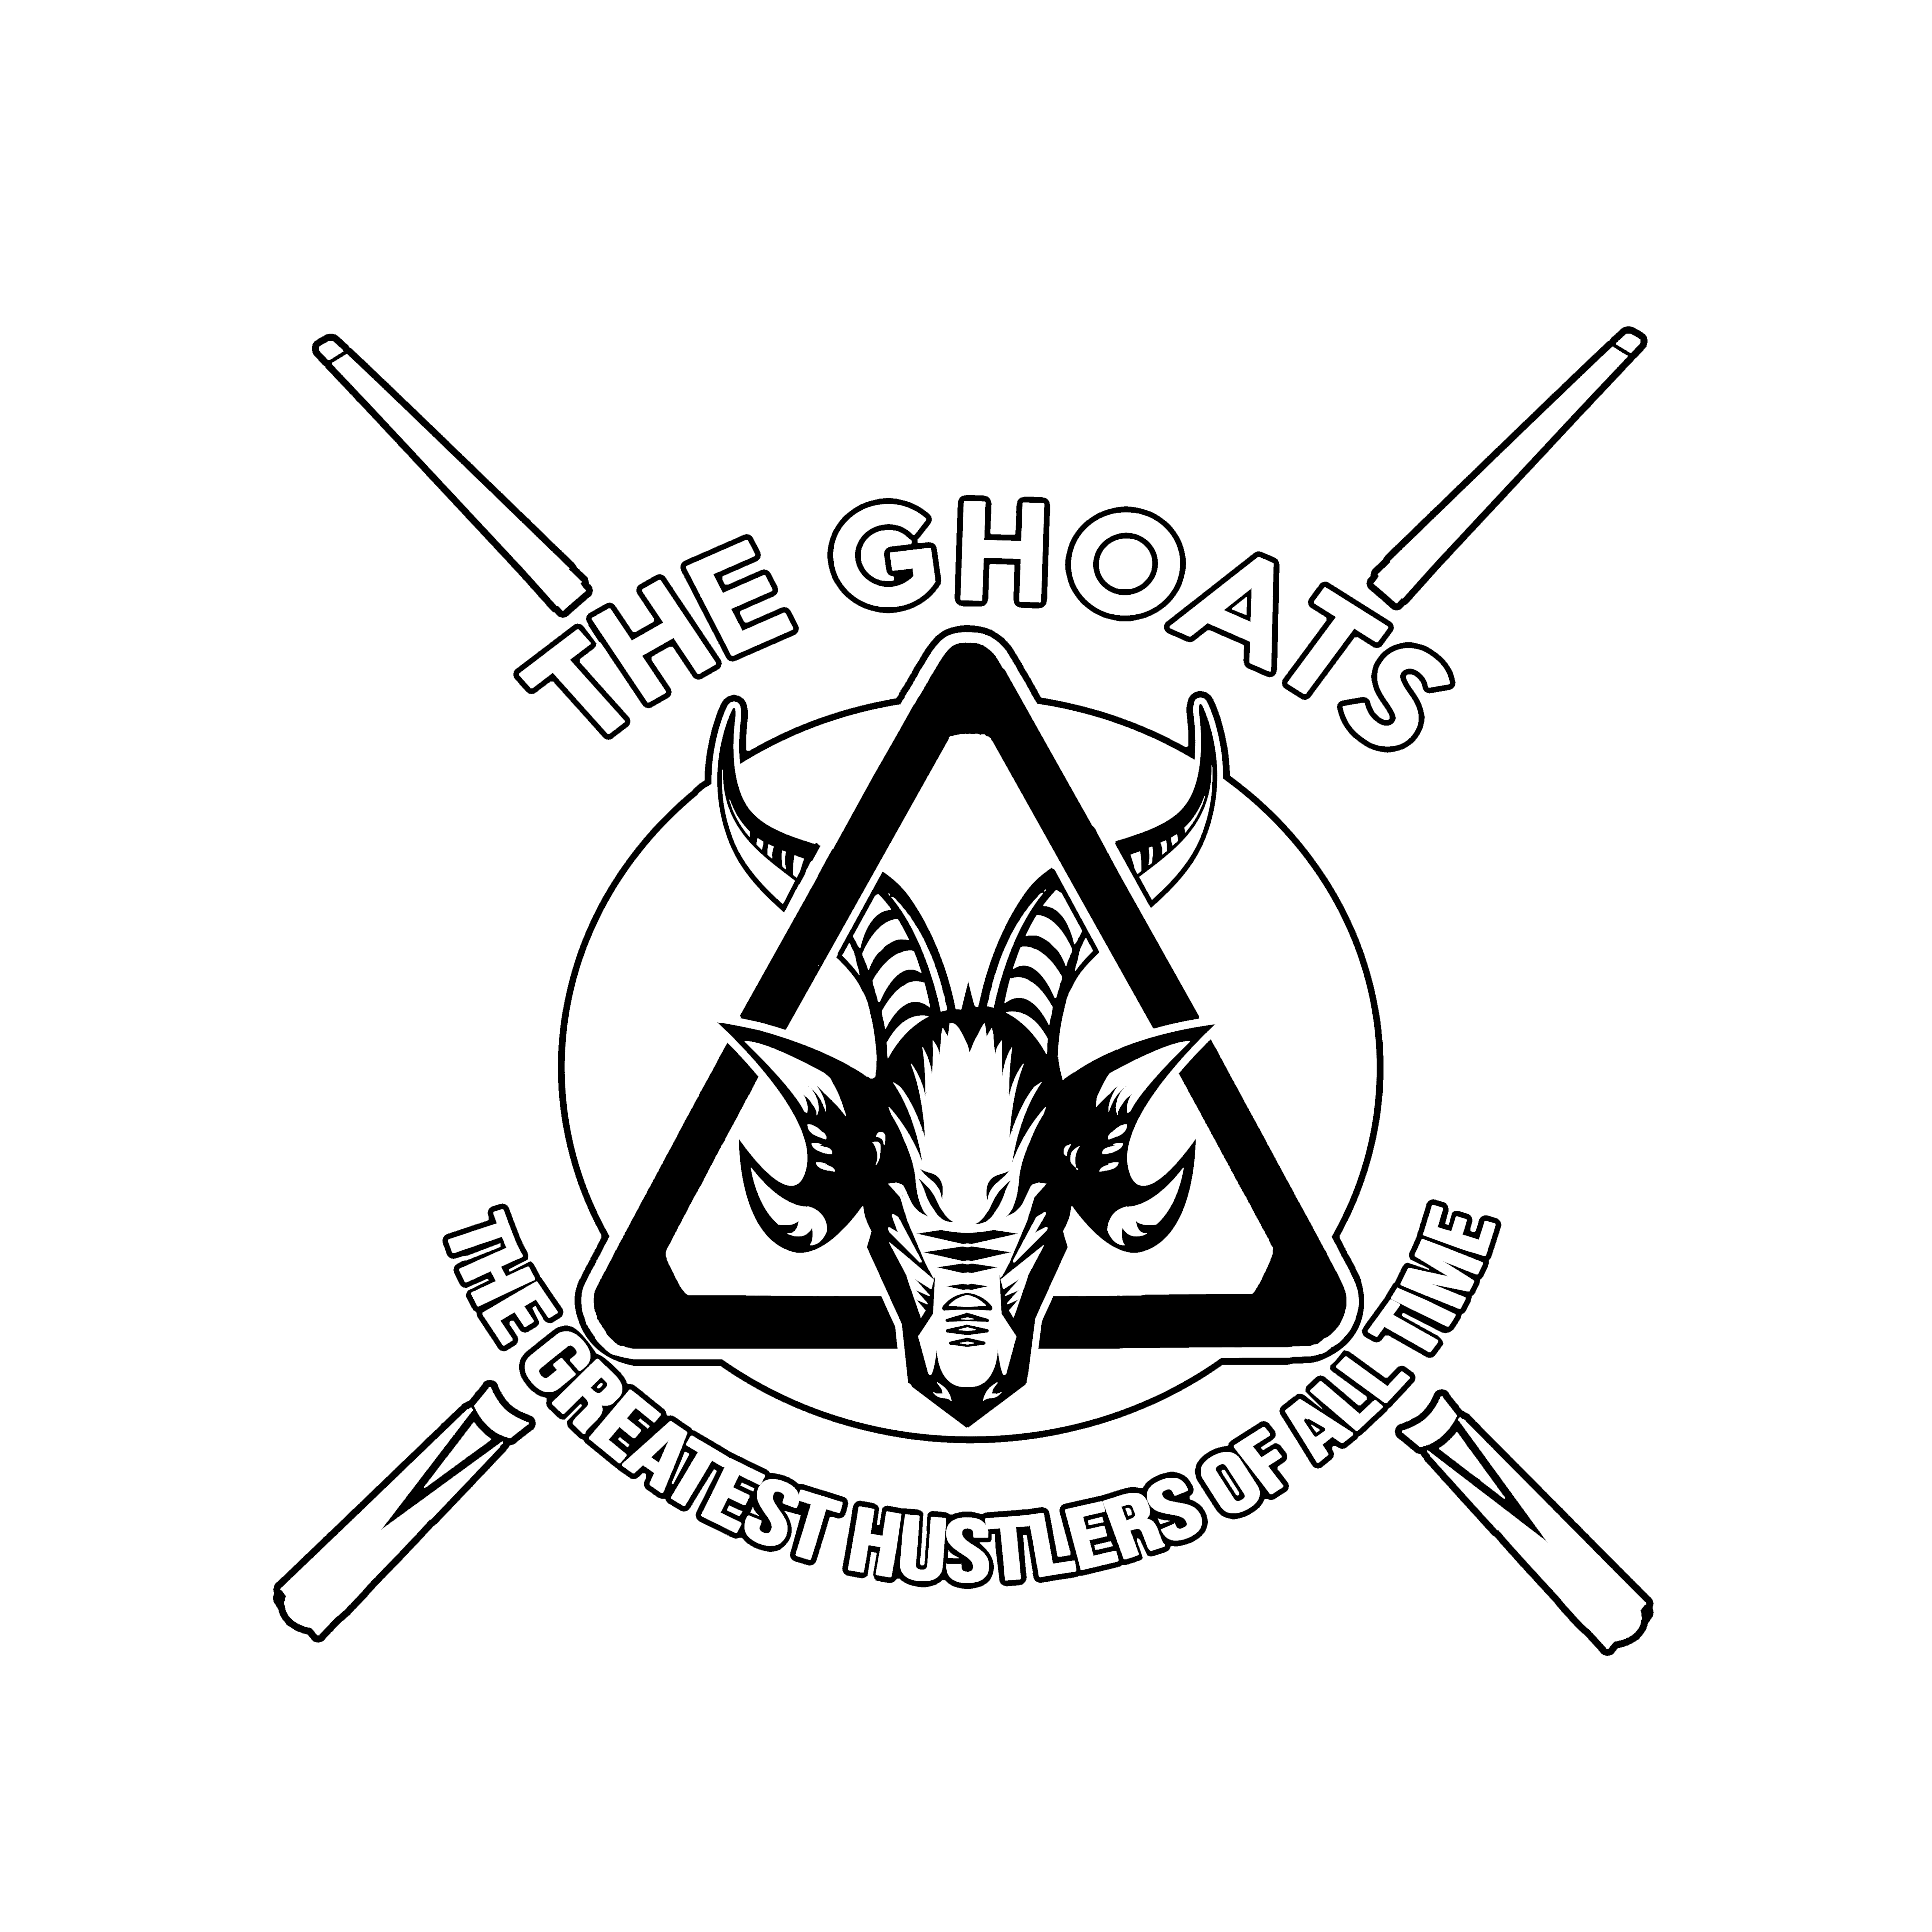 THE GHOATS